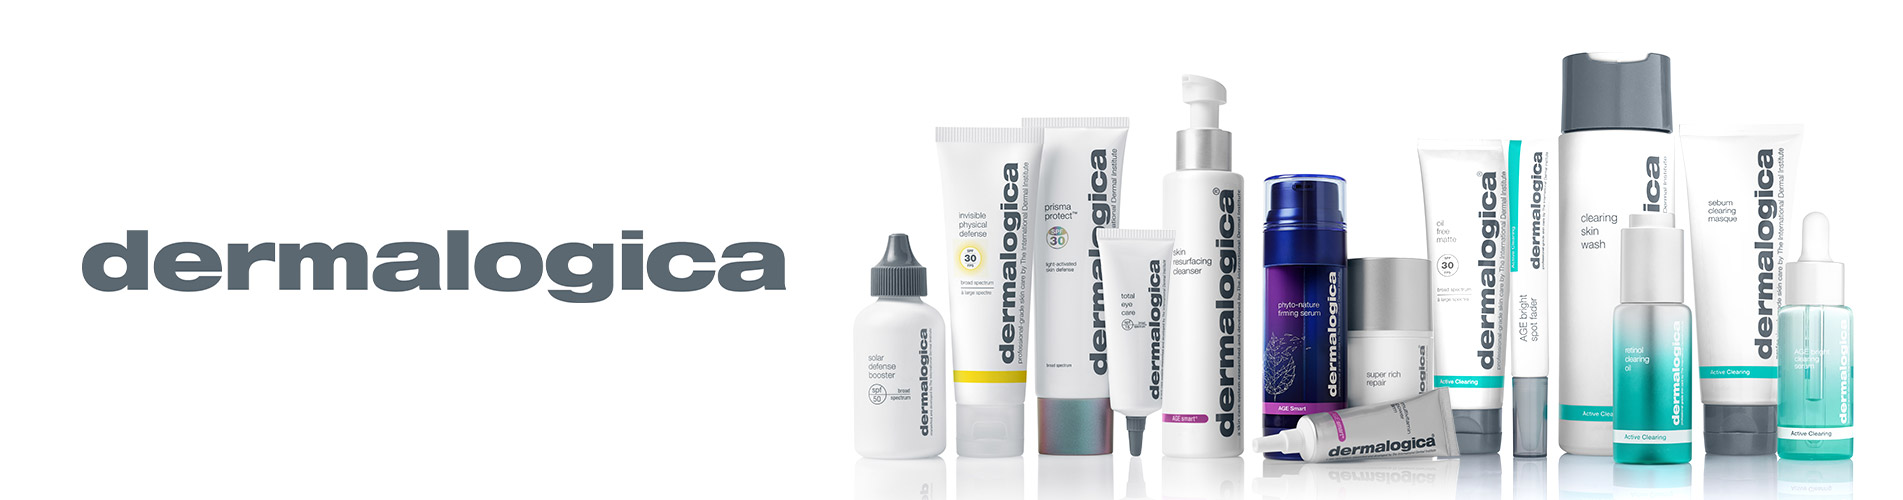 Buy dermalogica Products